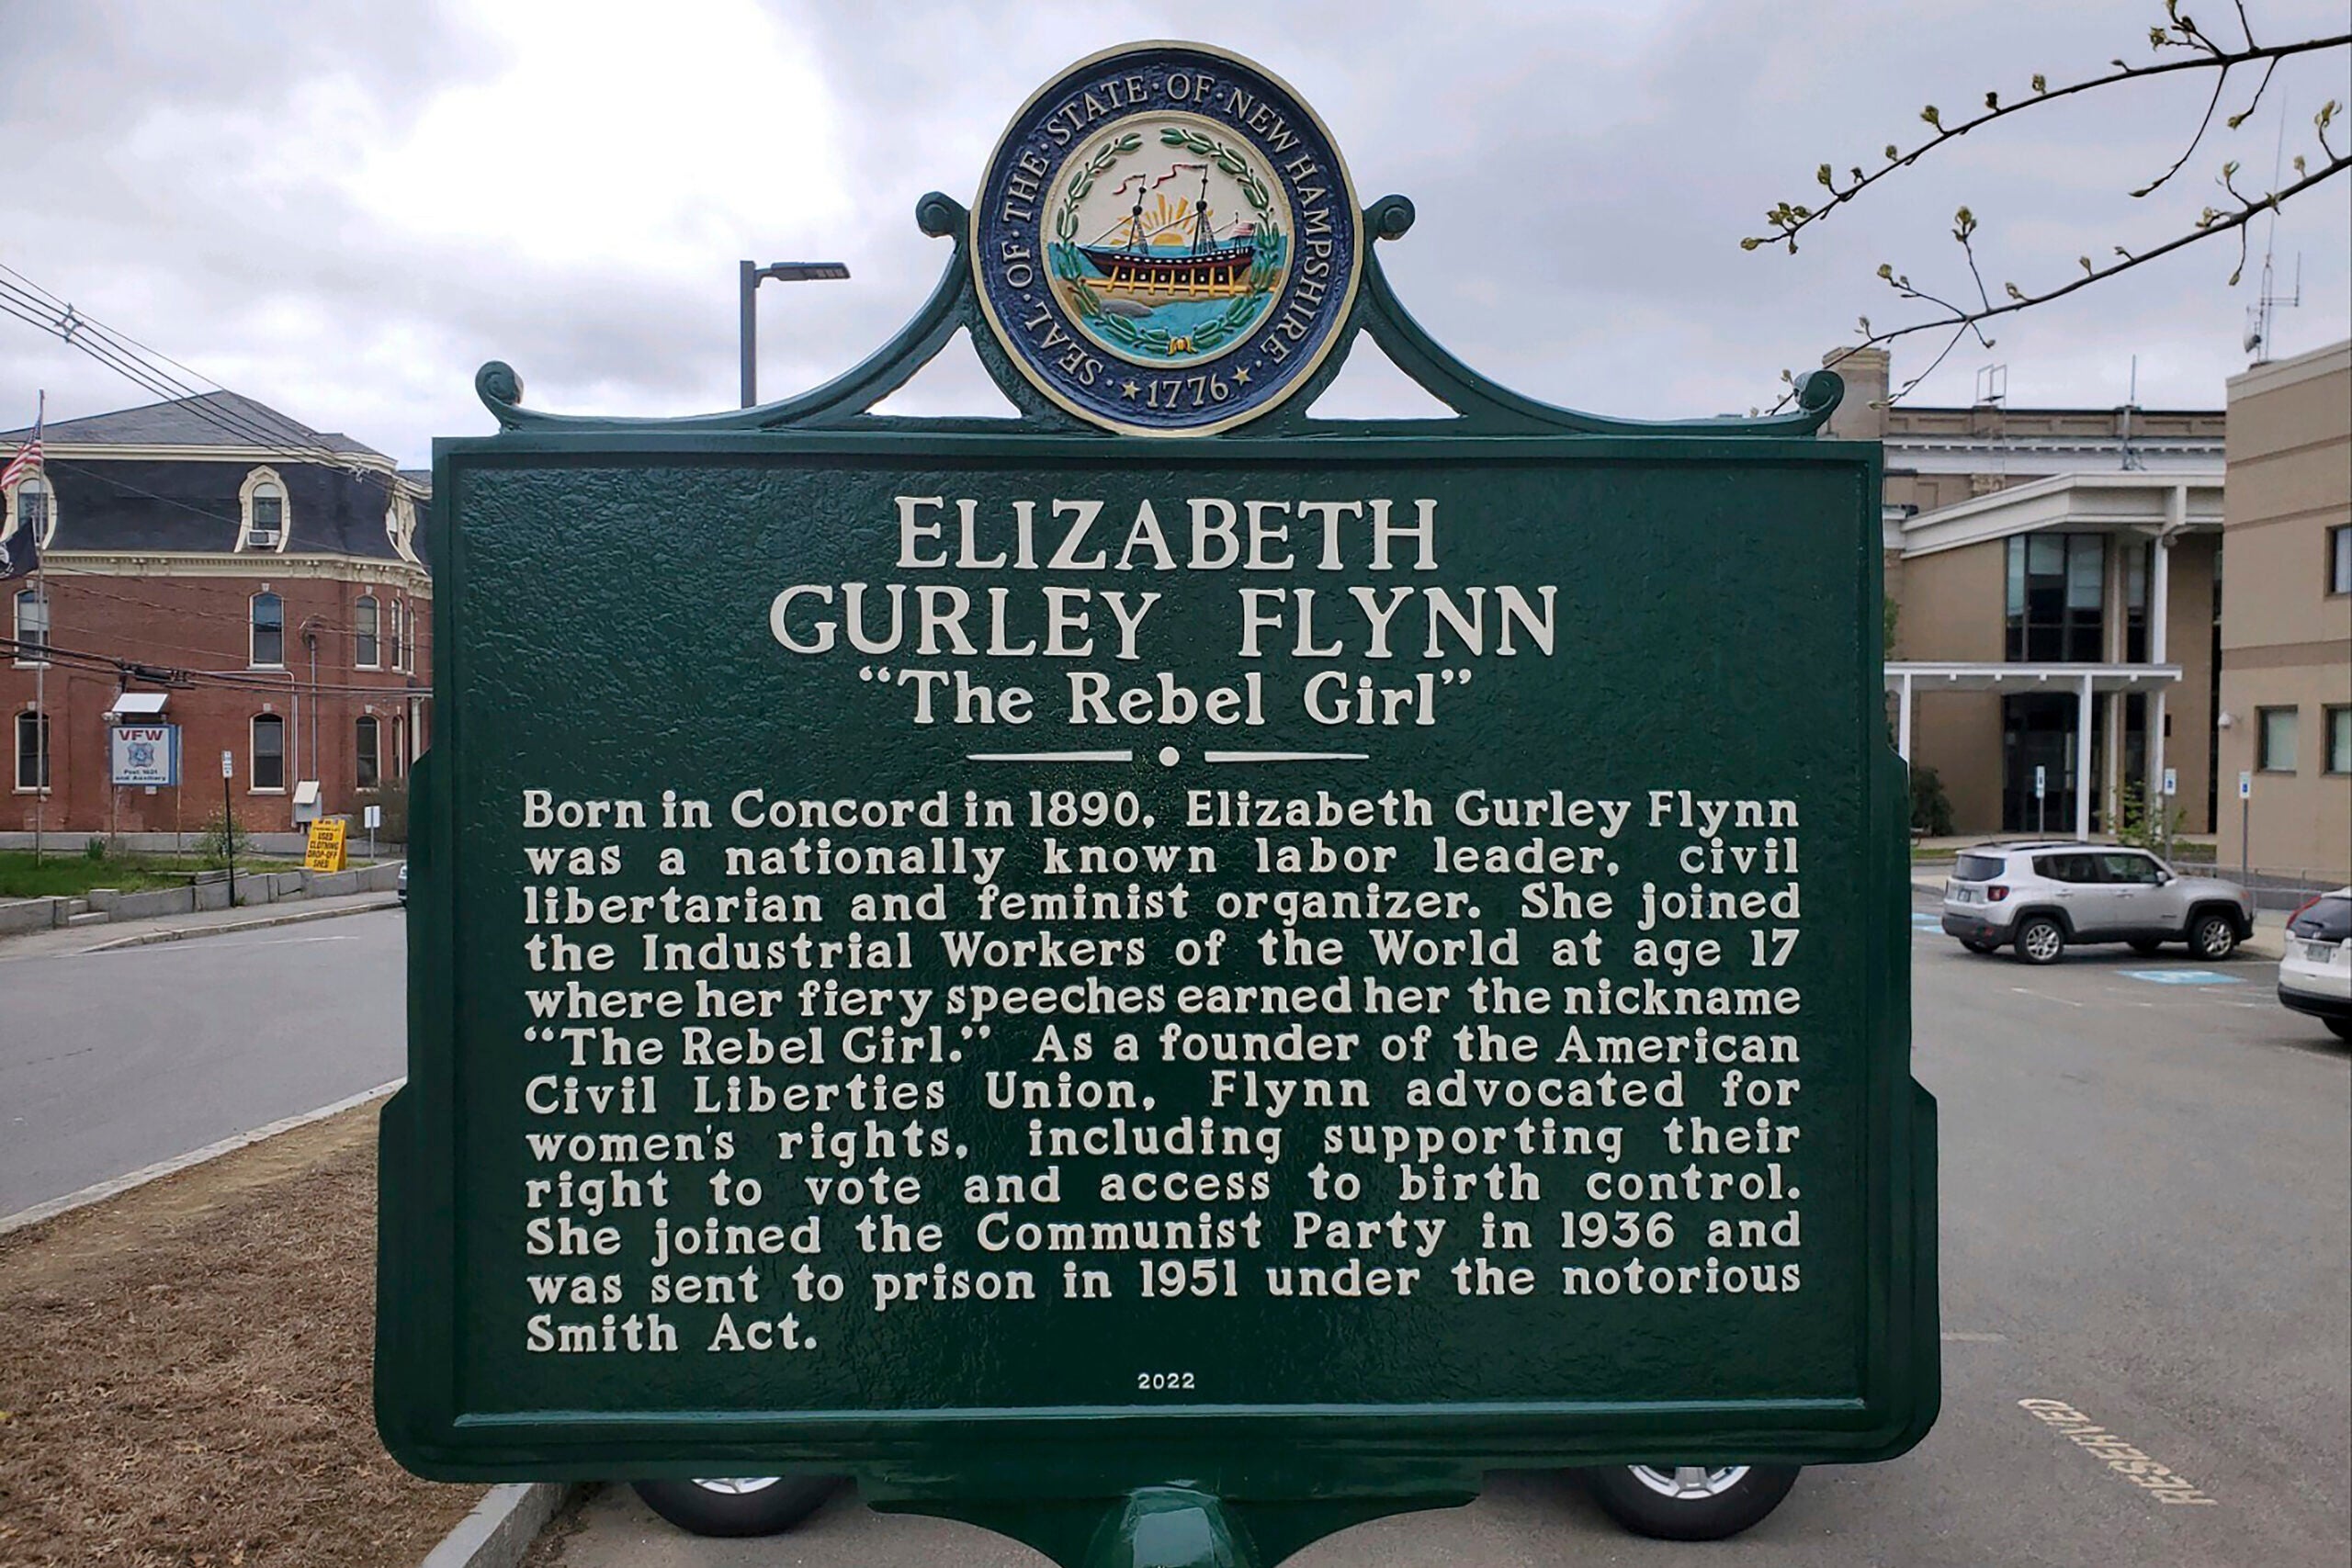 A dark green historical marker with white lettering dedicated to Elizabeth Gurley Flynn in Concord, New Hampshire.